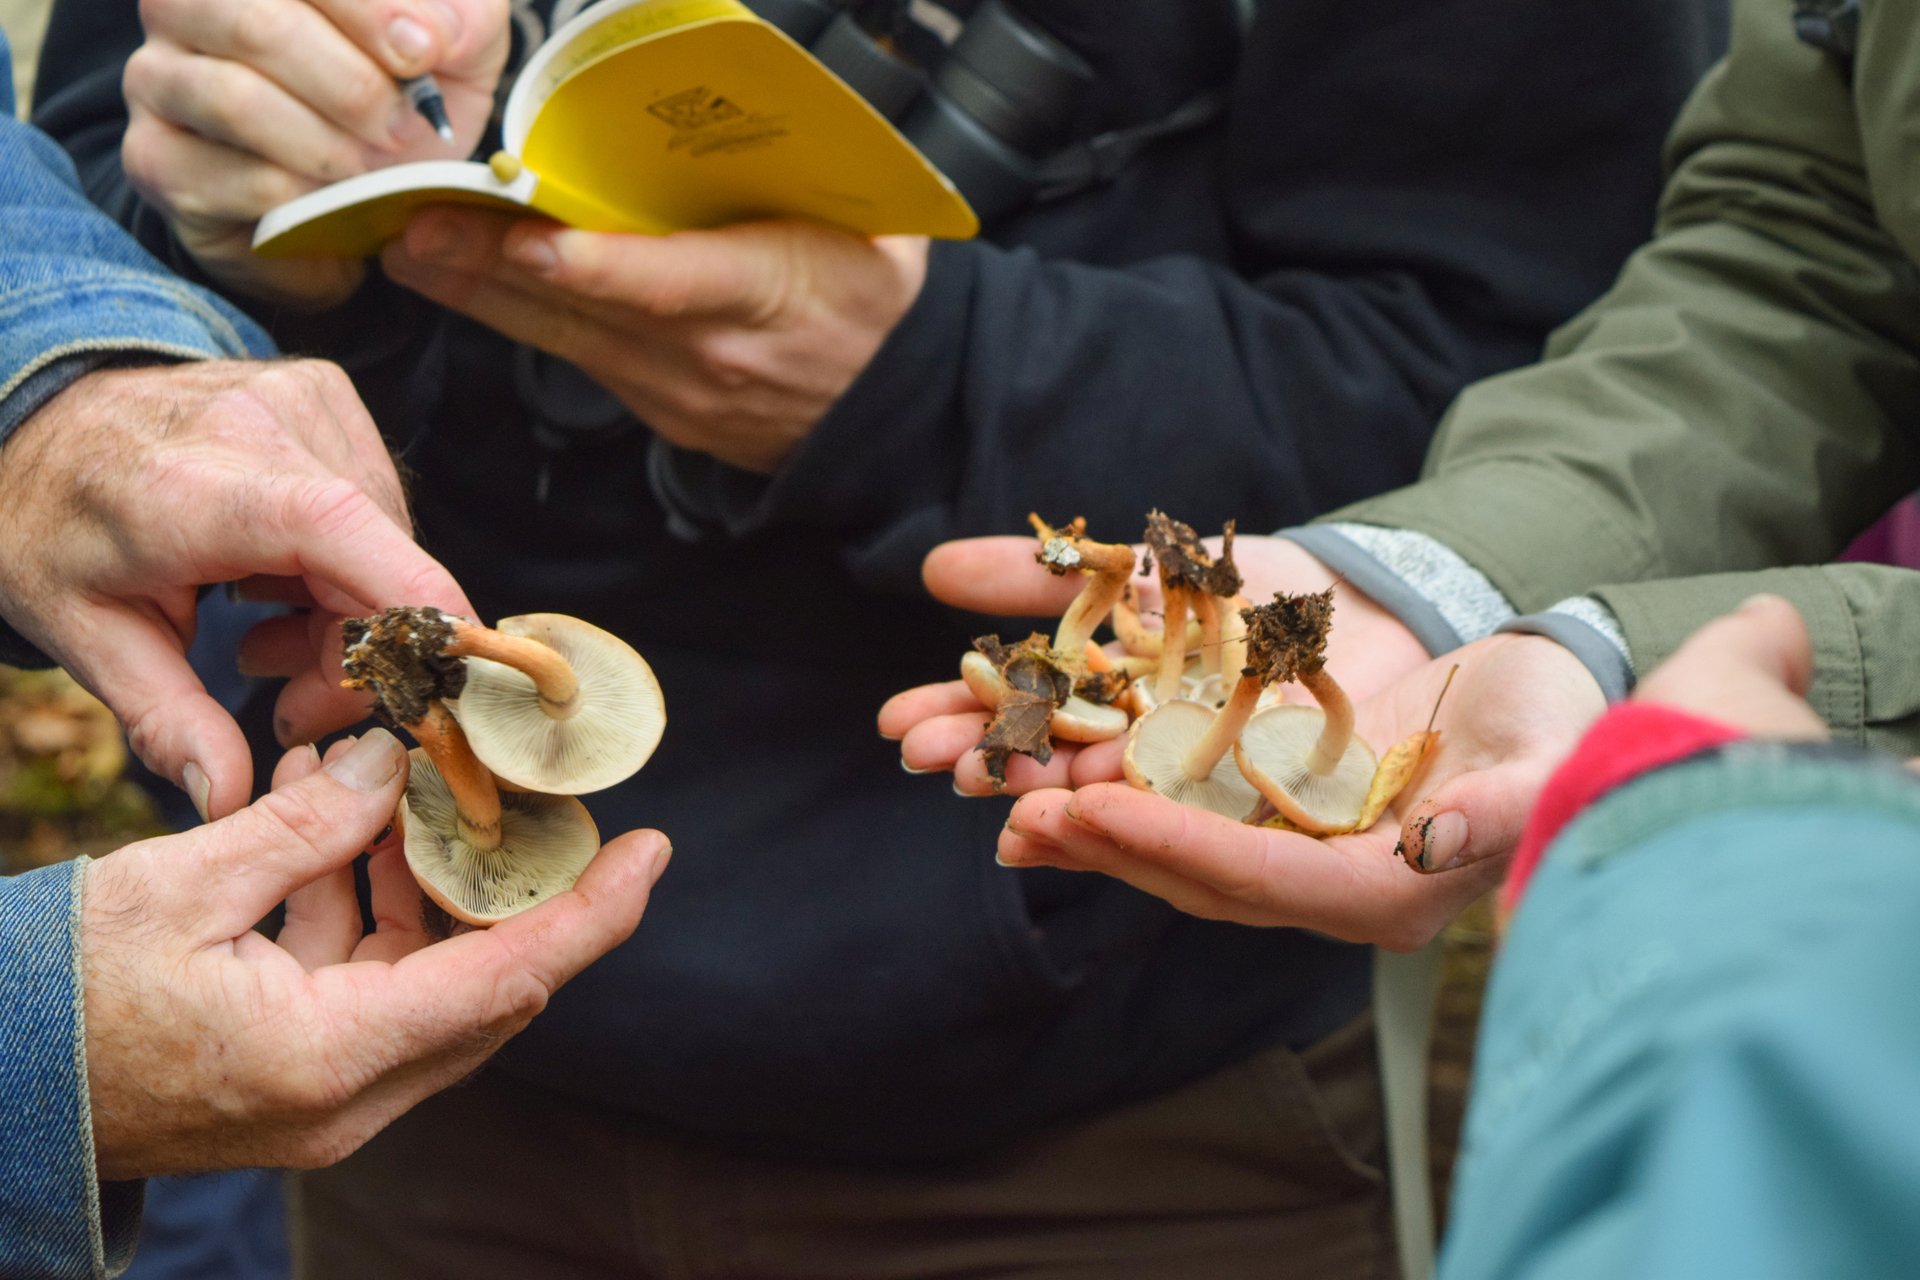 two sets of hands holding fungi with a person writing in a notebook